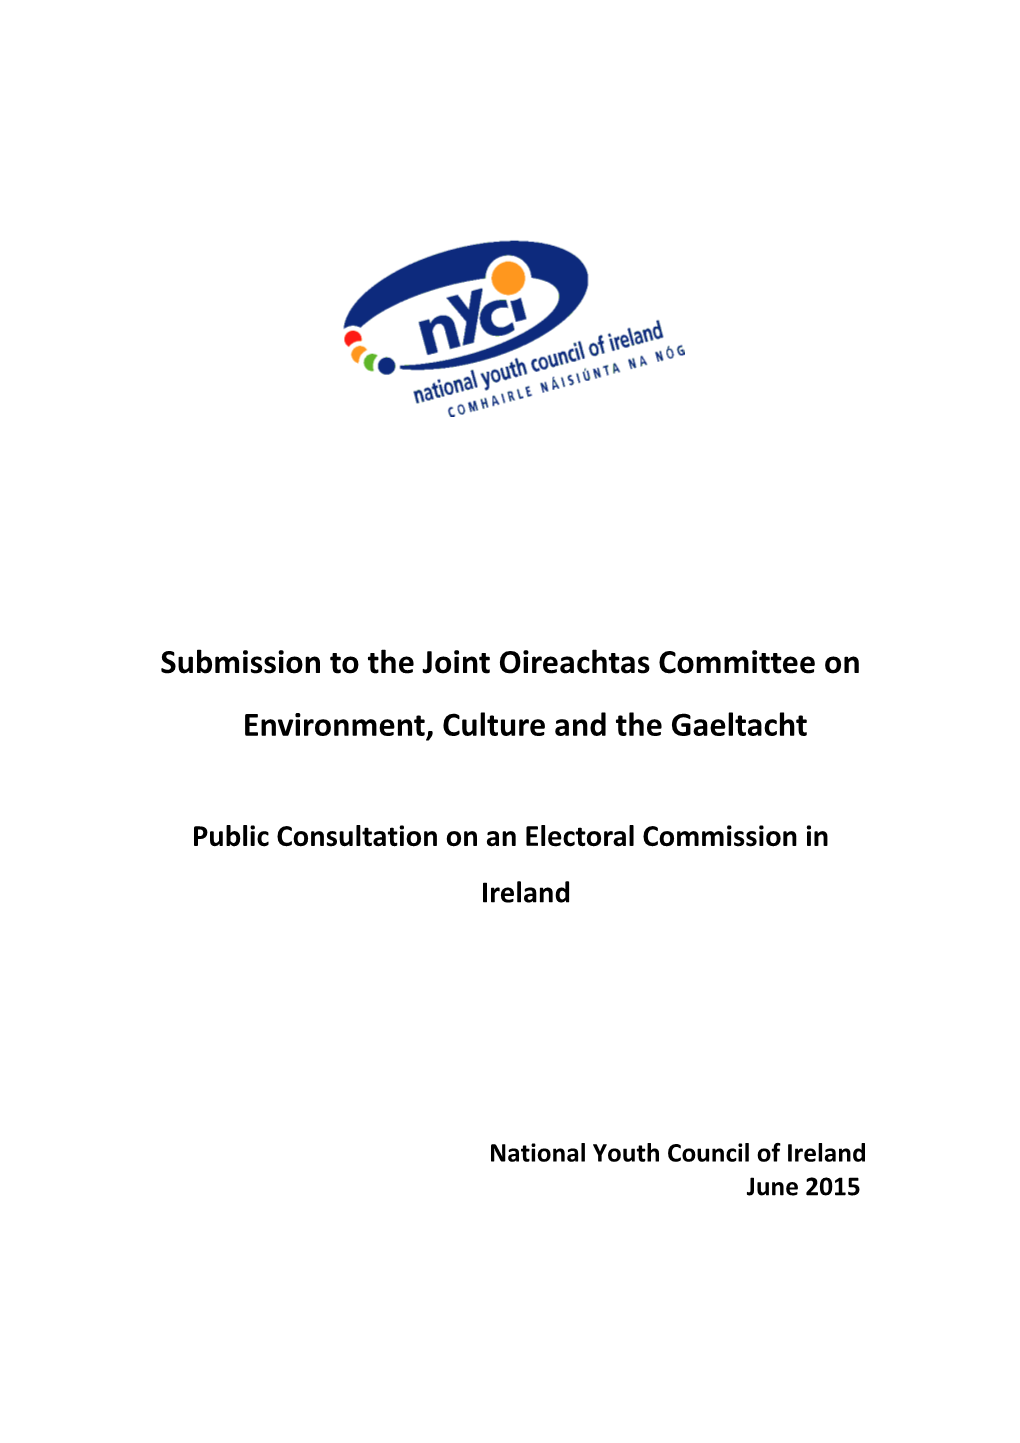 Submission to the Joint Oireachtas Committee on Environment, Culture and the Gaeltacht